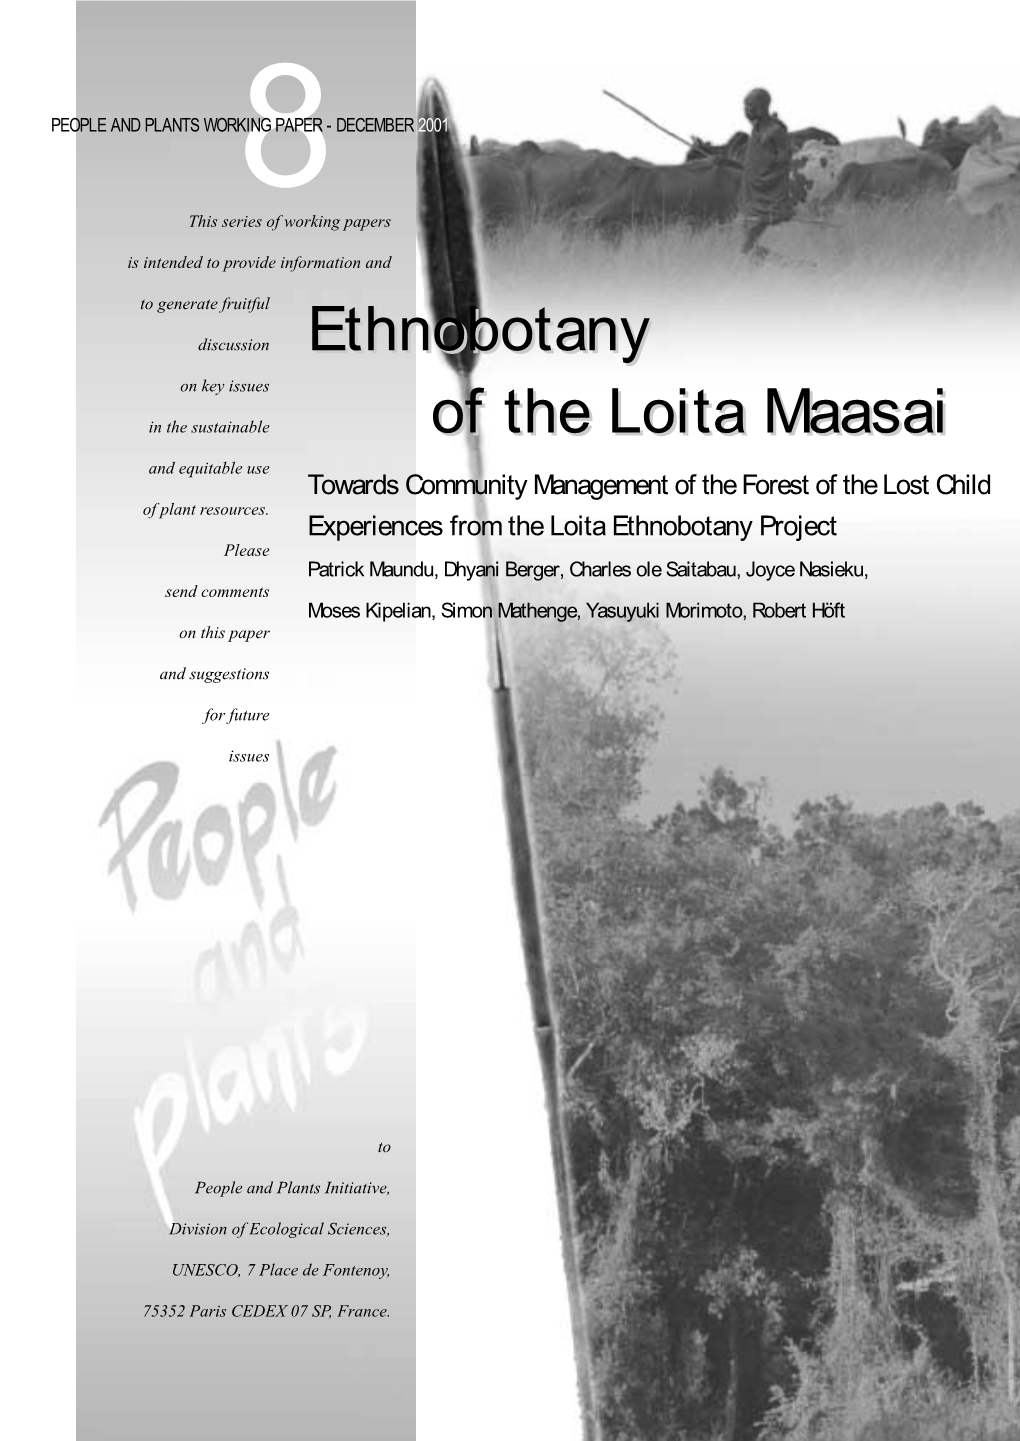 Ethnobotany of the Loita Maasai: Towards Community Management of the Forest of the Lost Child - Experiences from the Loita Ethnobotany Project